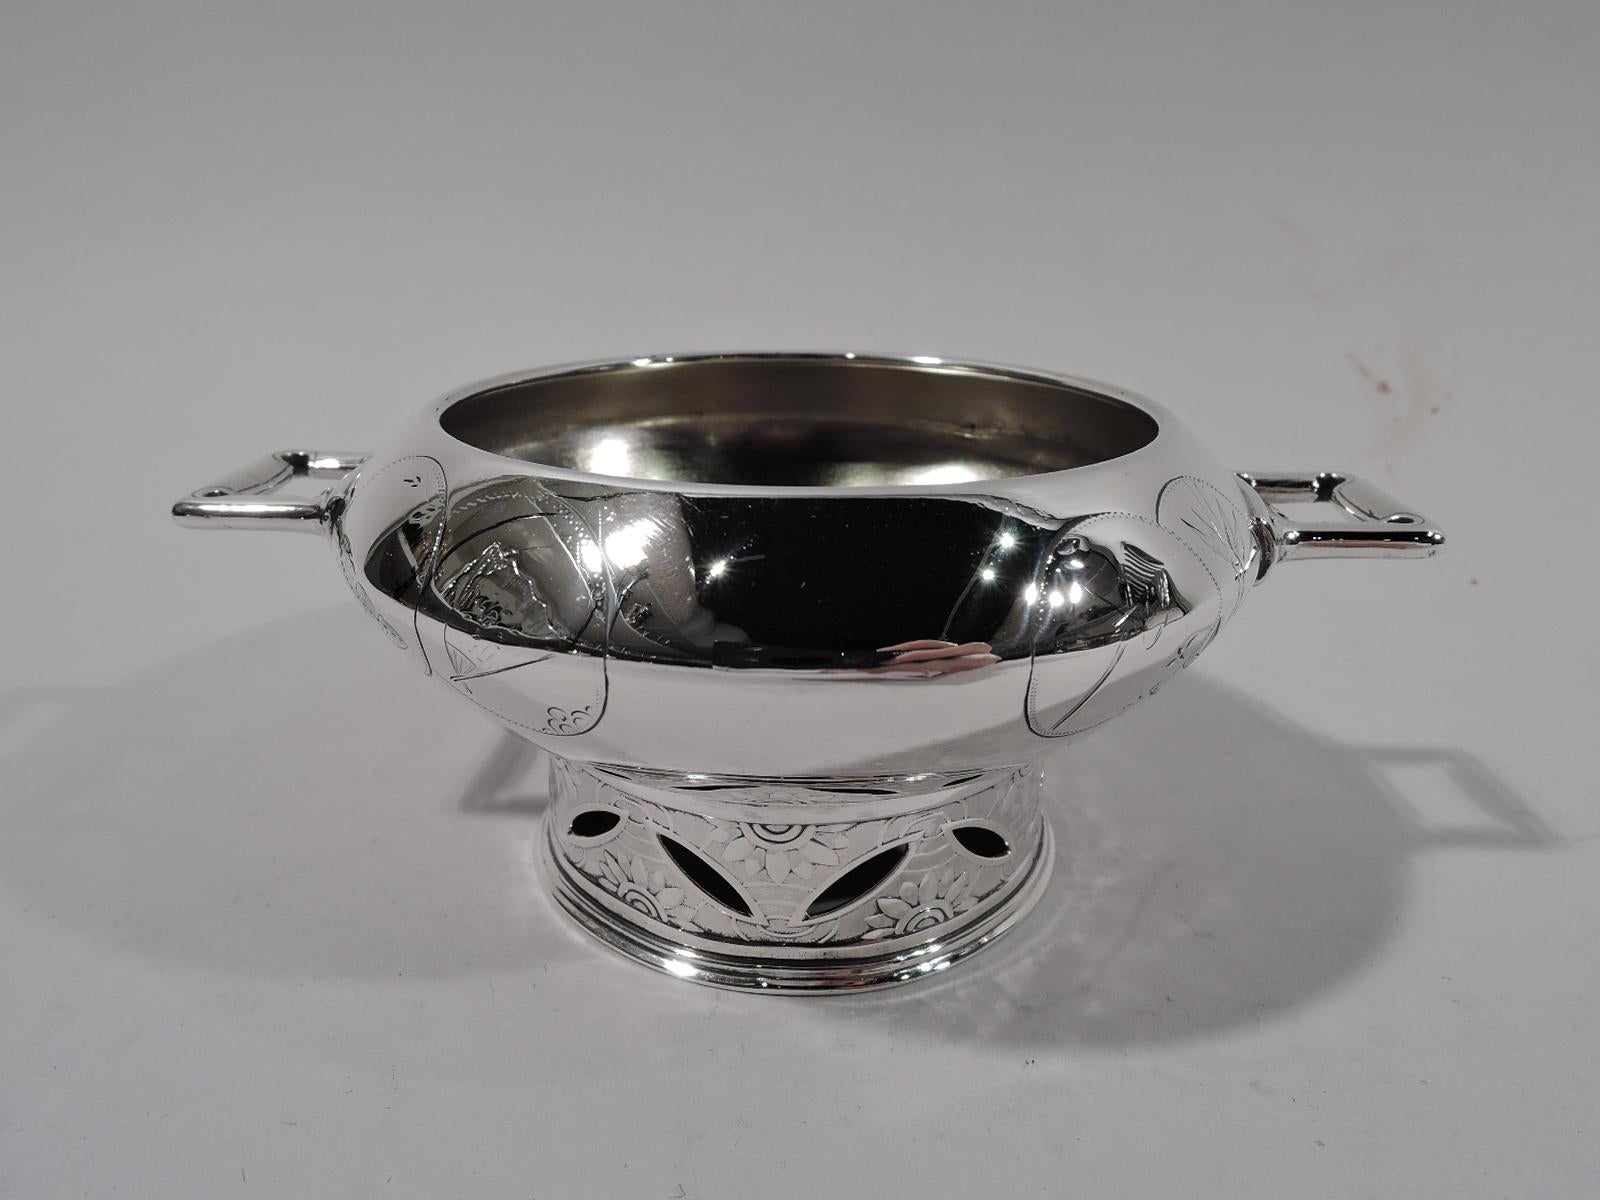 Pair of Japonesque sterling silver open salts. Made by John C. Moore for Tiffany & Co. in New York. Round with open rectangular bracket handles and straight foot. Engraved overlapping seals decorated with modish motifs, including fan, bug, vase, and